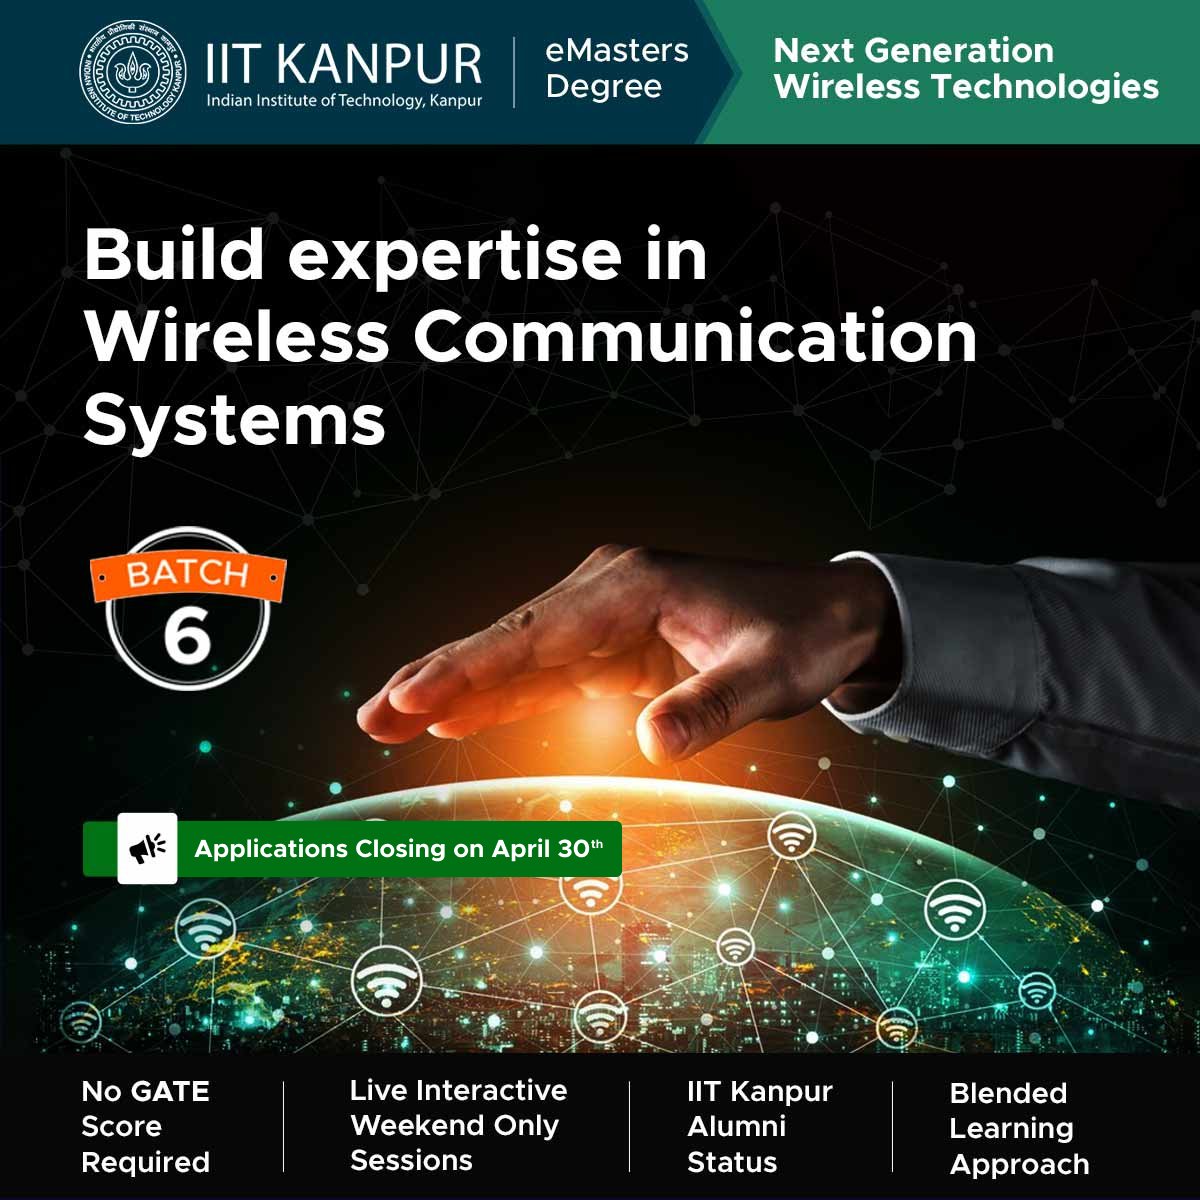 Design Modern Digital Communication Systems based on 5G, Edge Computing & #WirelessCommunication. This #eMasters in #WirelessTechnologies equips you with the skills to thrive in this ever-evolving field. 

Last date Apr 30. Apply Now! emasters.iitk.ac.in/course/masters… 

#IITKanpur #iitk